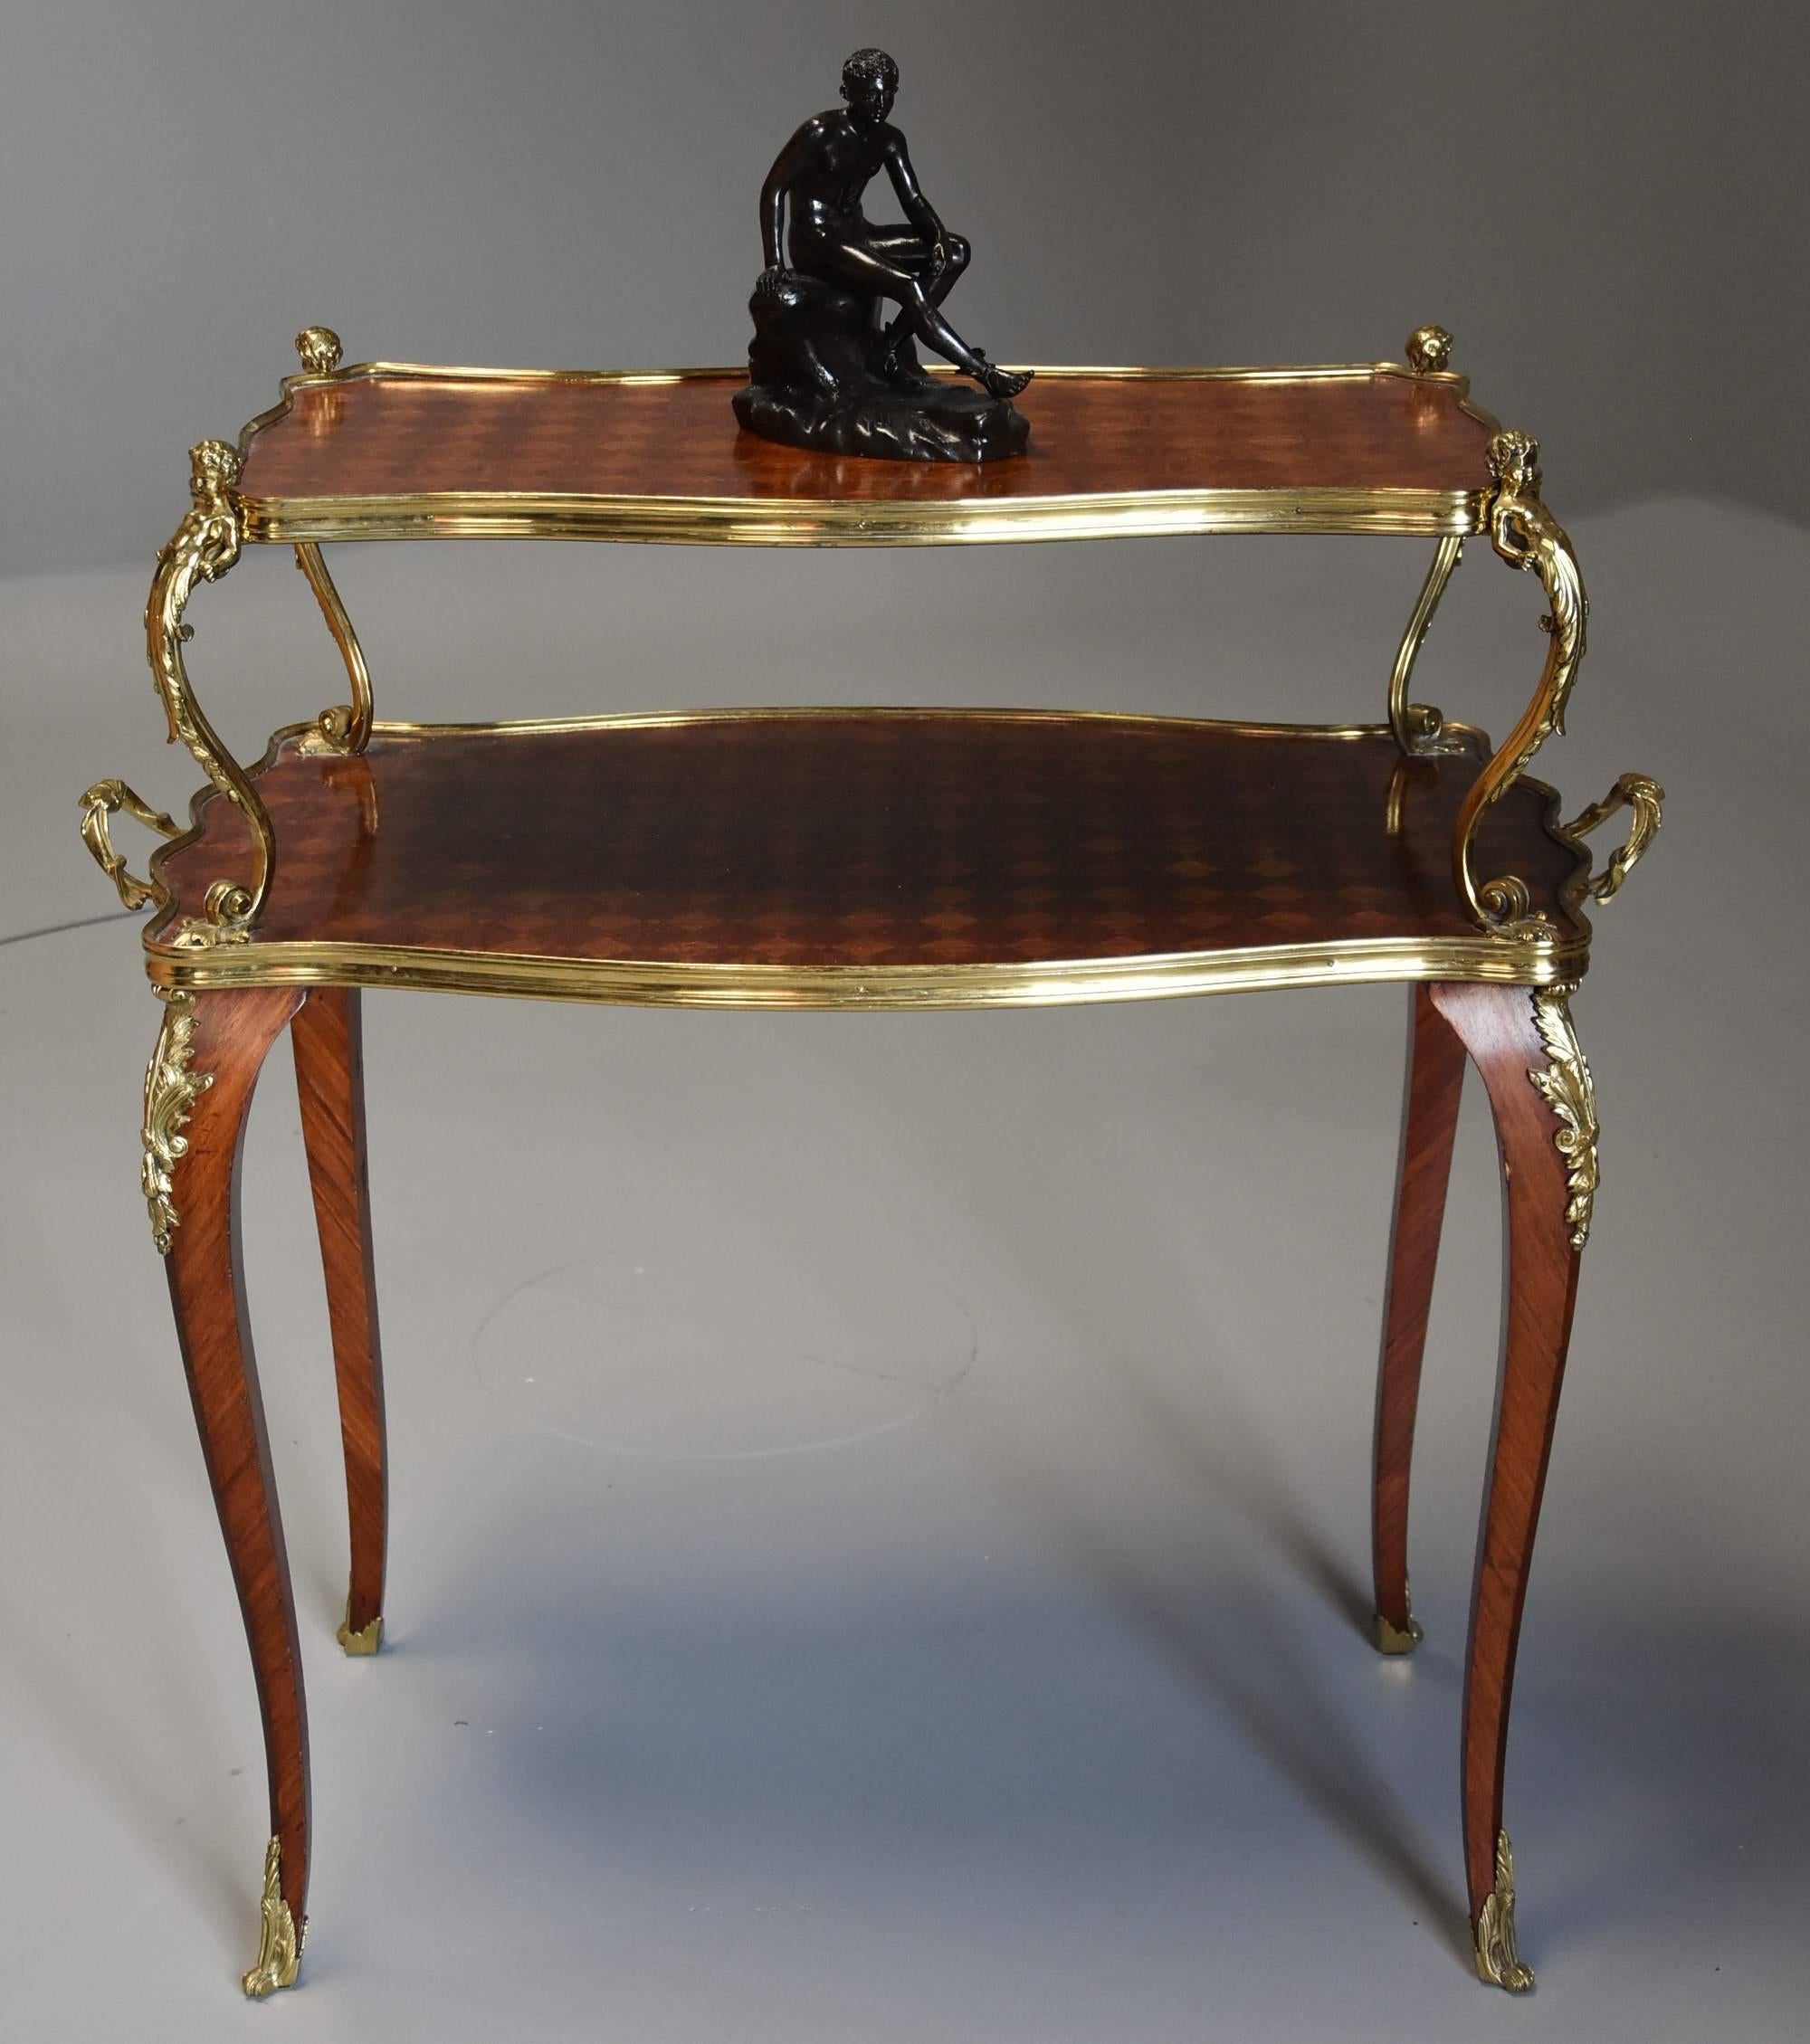 French 19th Century Kingwood Two-Tier Parquetry Serpentine Shaped Etagere For Sale 2